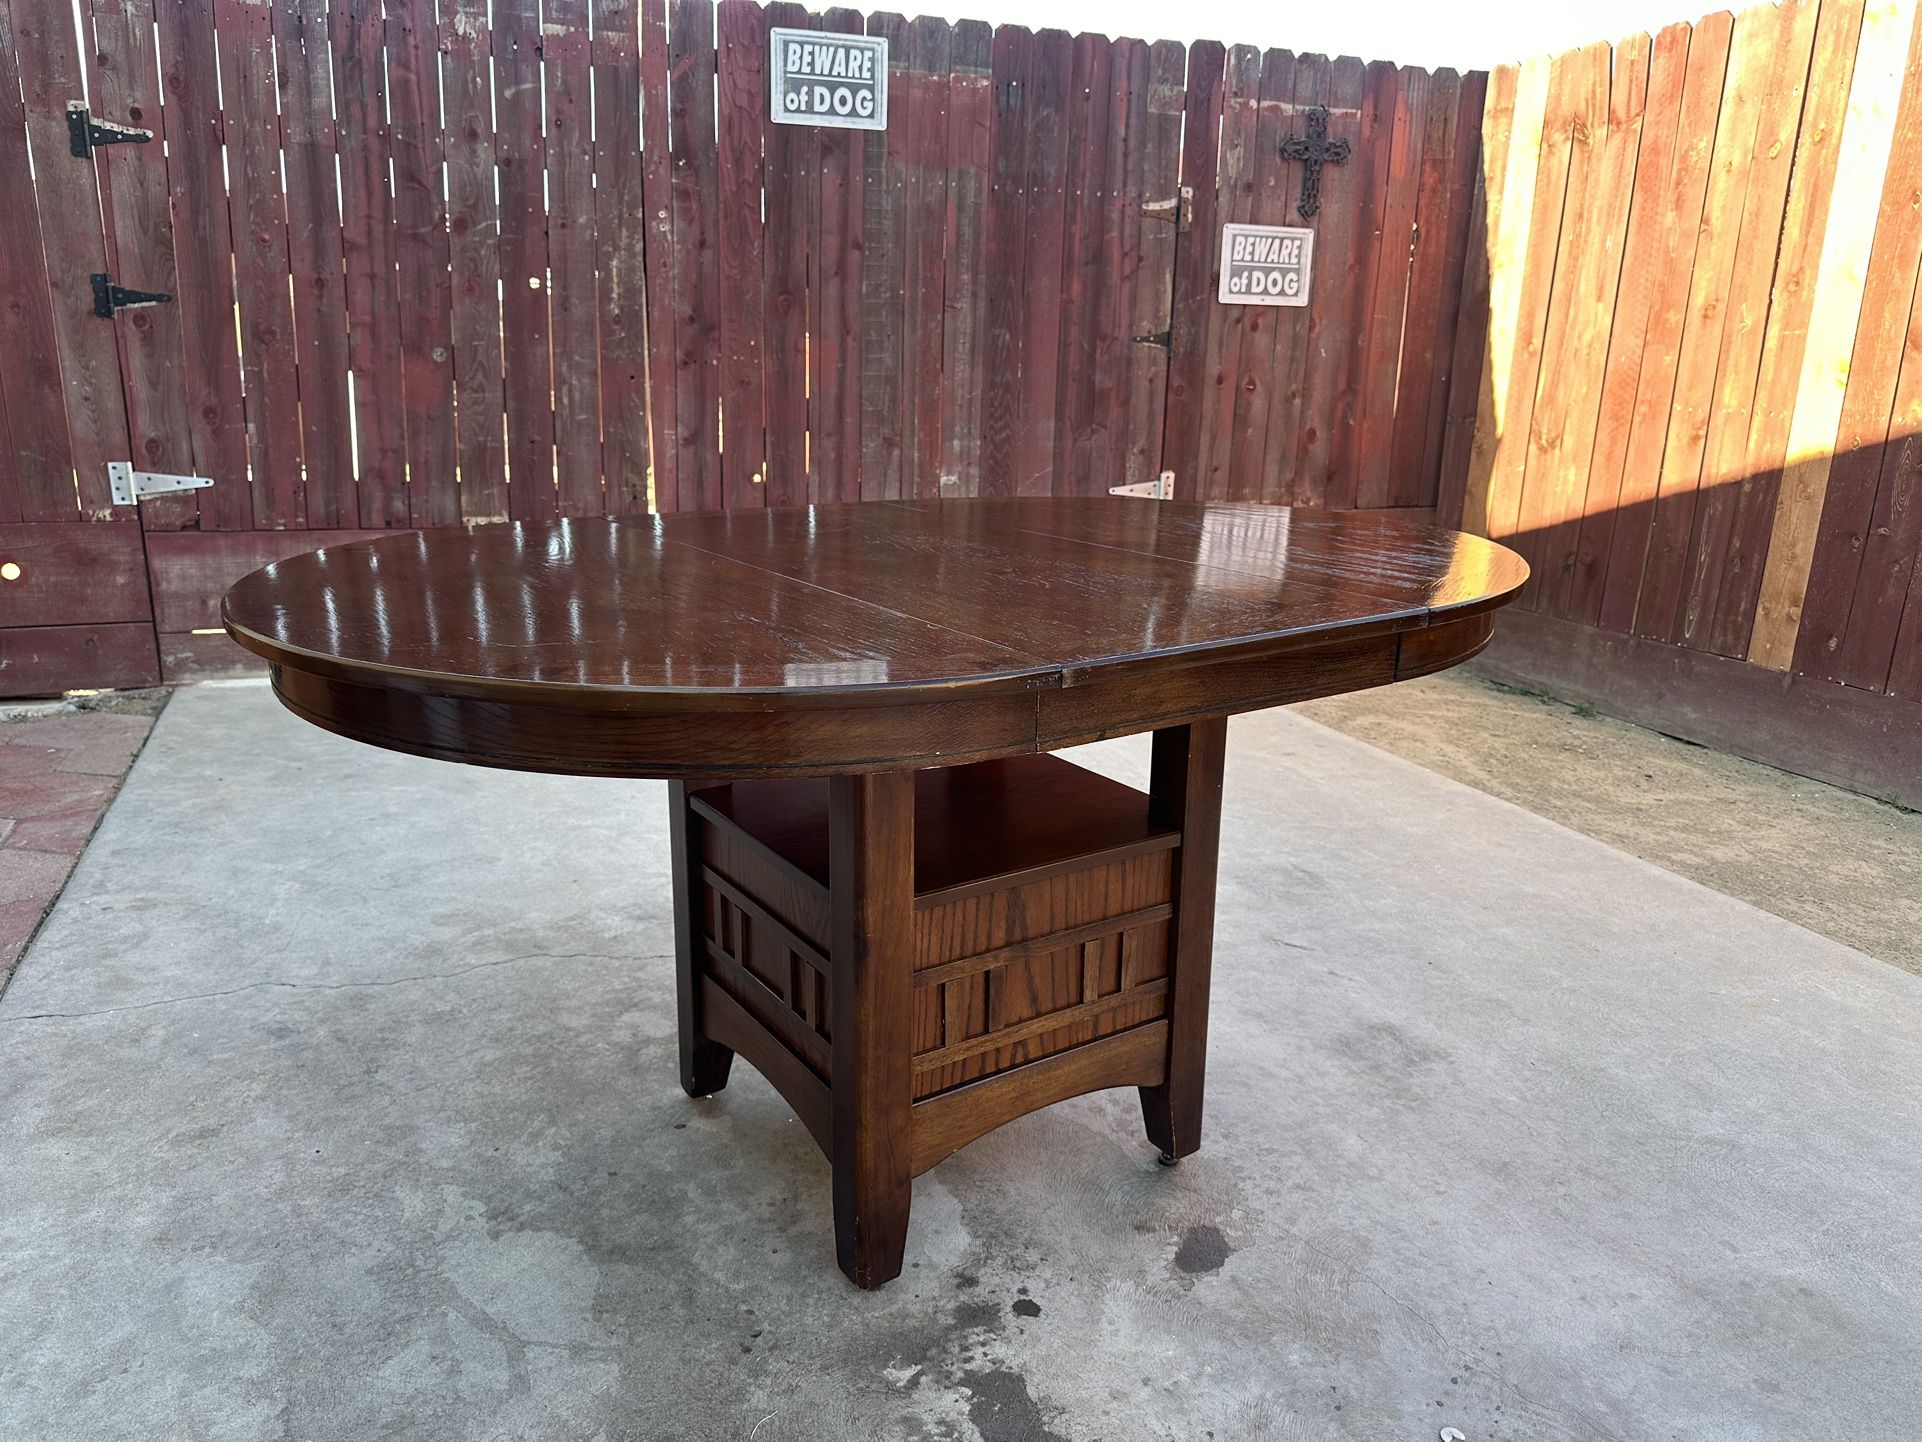 Table (need gone)